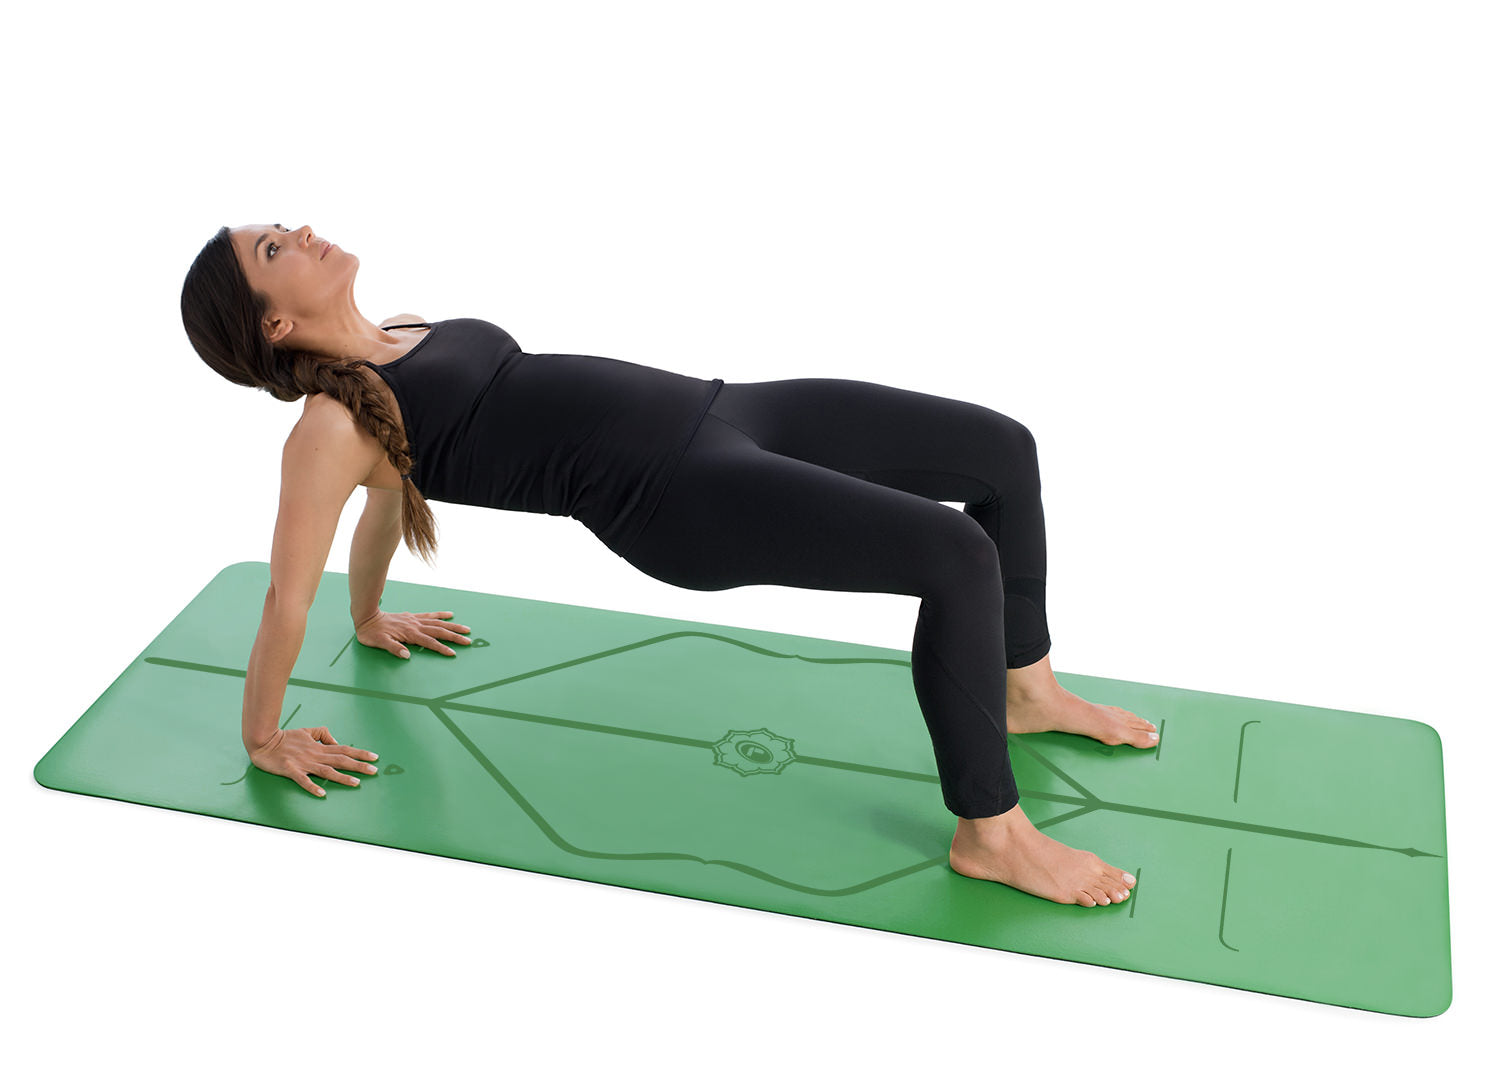 Liforme - 💥A 3-LAYERED GIVEAWAY! 👀💥 3 of you can win a Liforme Mat each!  See simple instructions below to enter… Did you know that Liforme mats have  a unique and patented